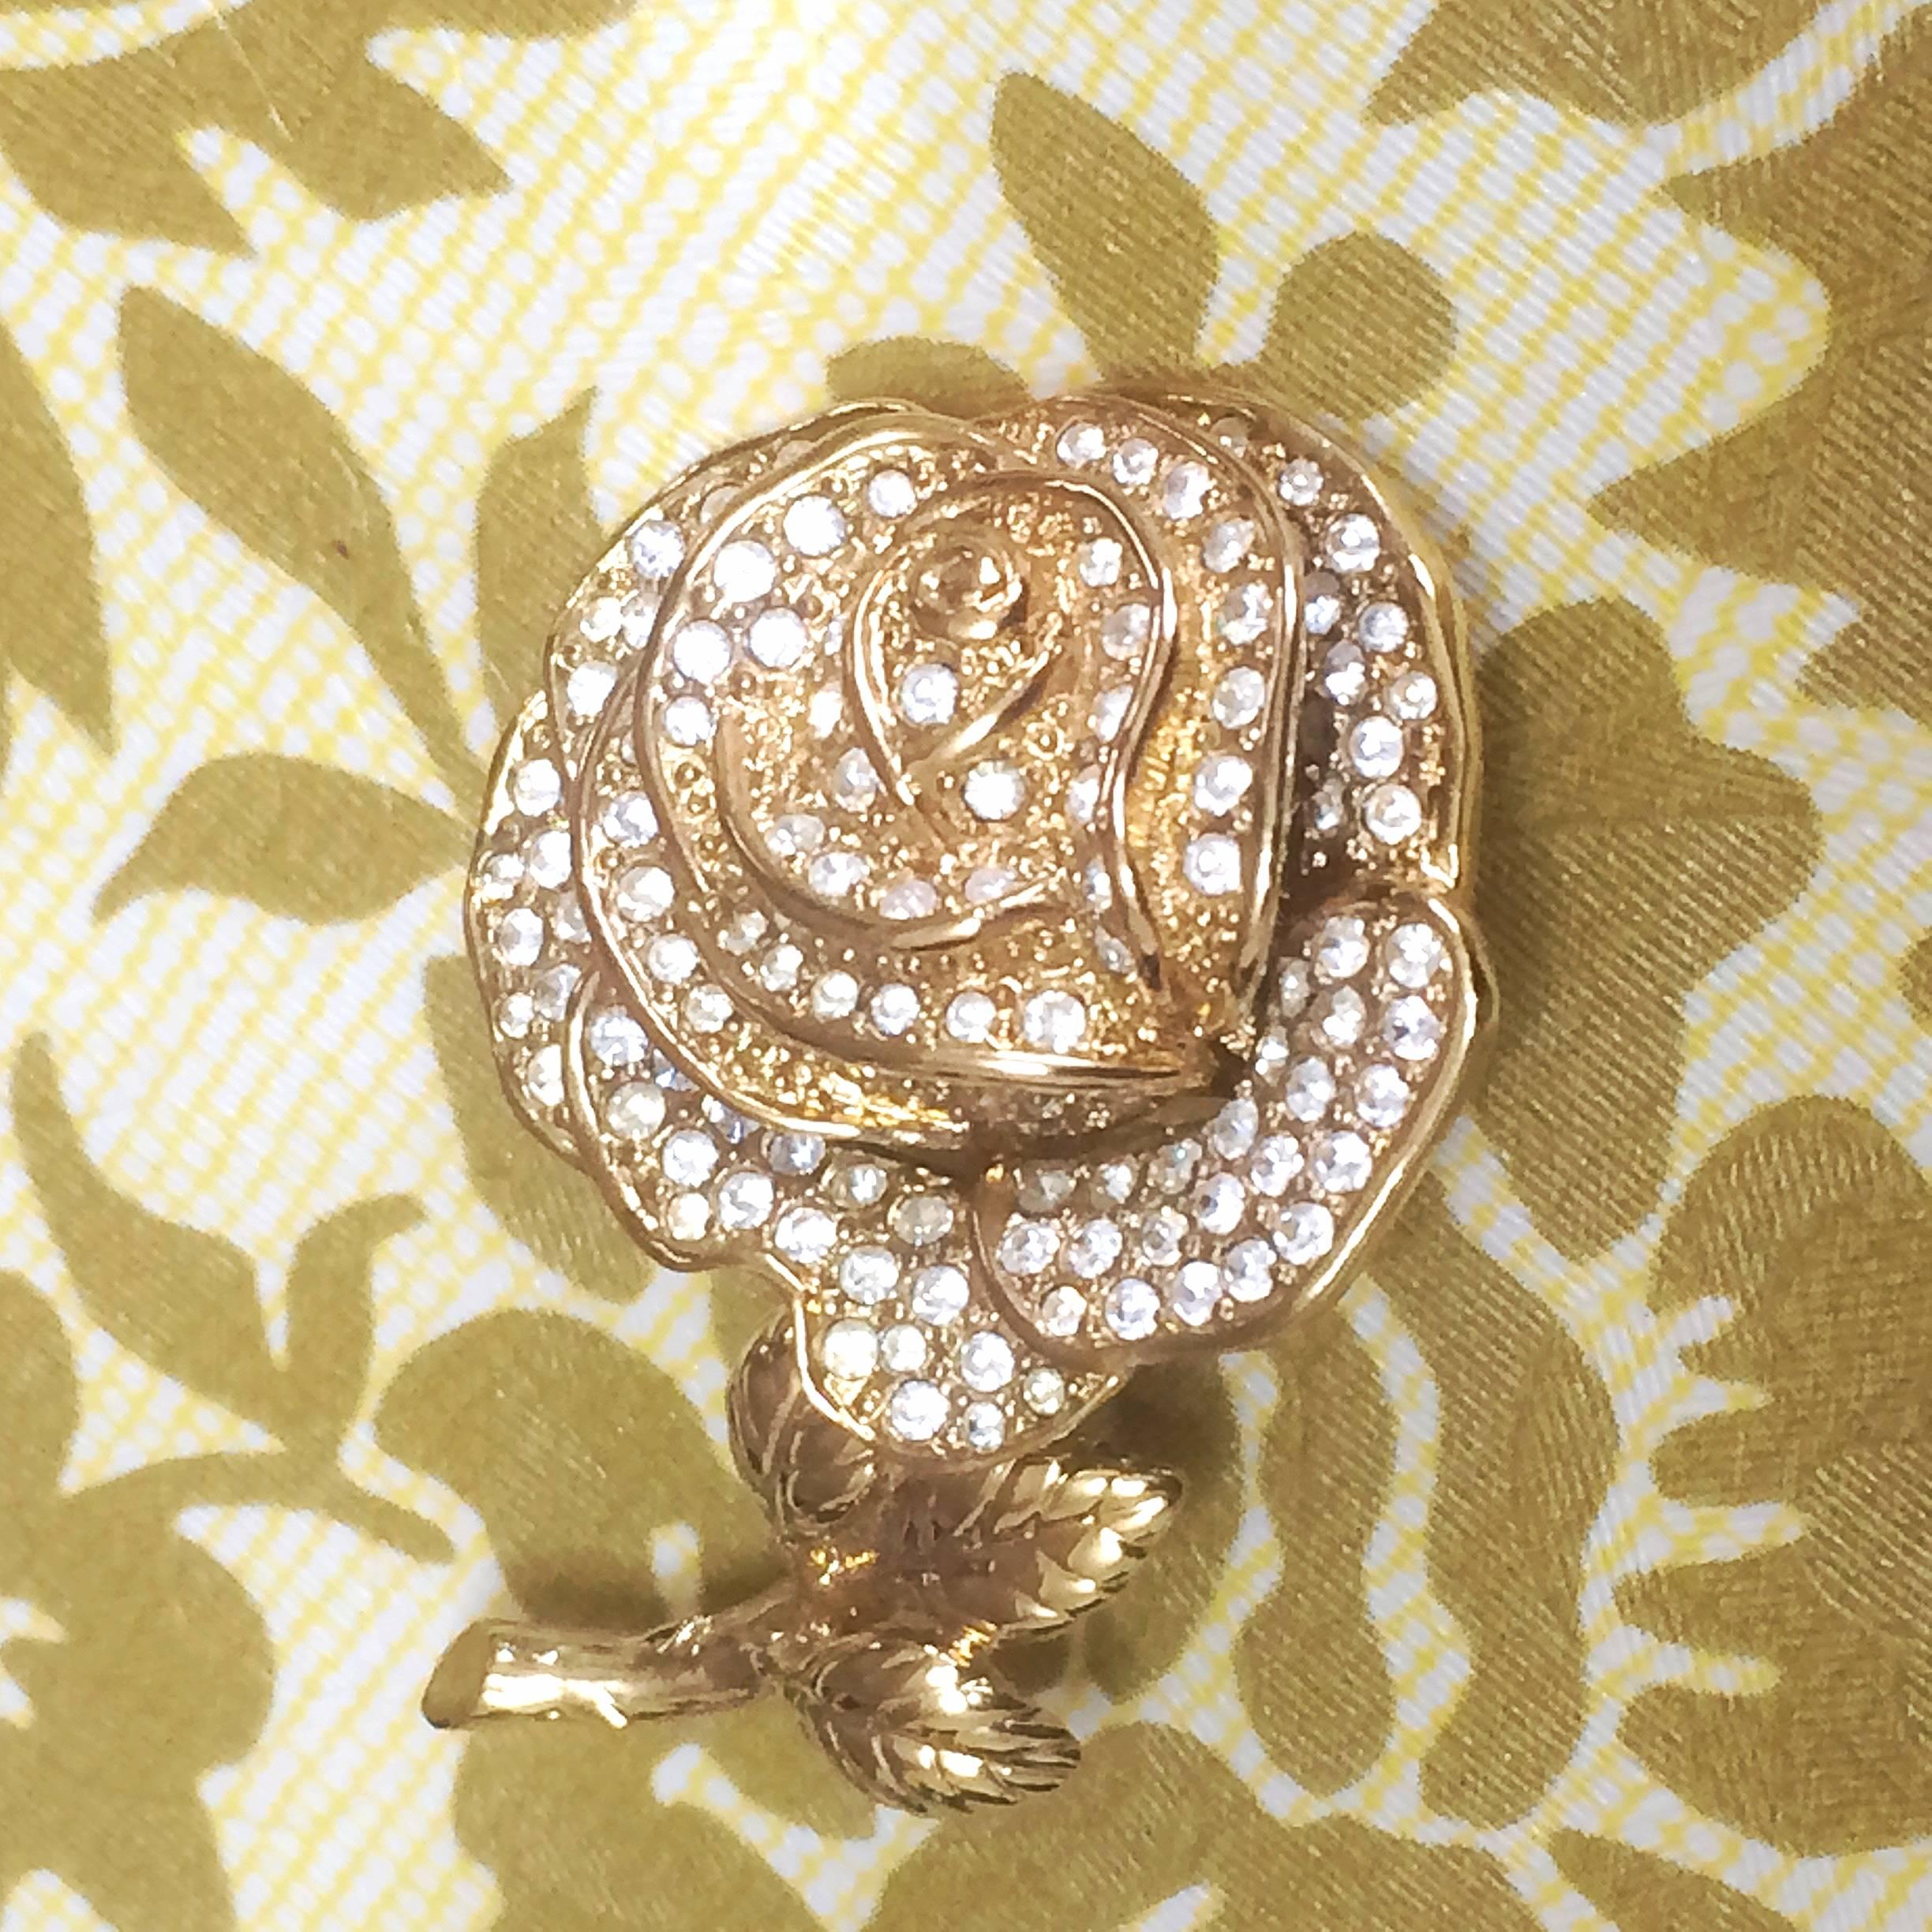 1990s. MINT. Vintage Christian Dior rose flower brooch with rhinestone crystals. Can also be hat, scarf, jacket pin.

Introducing another fabulous jewelry piece from Christian Dior back in the 90's.
In MINT/excellent vintage condition, rose